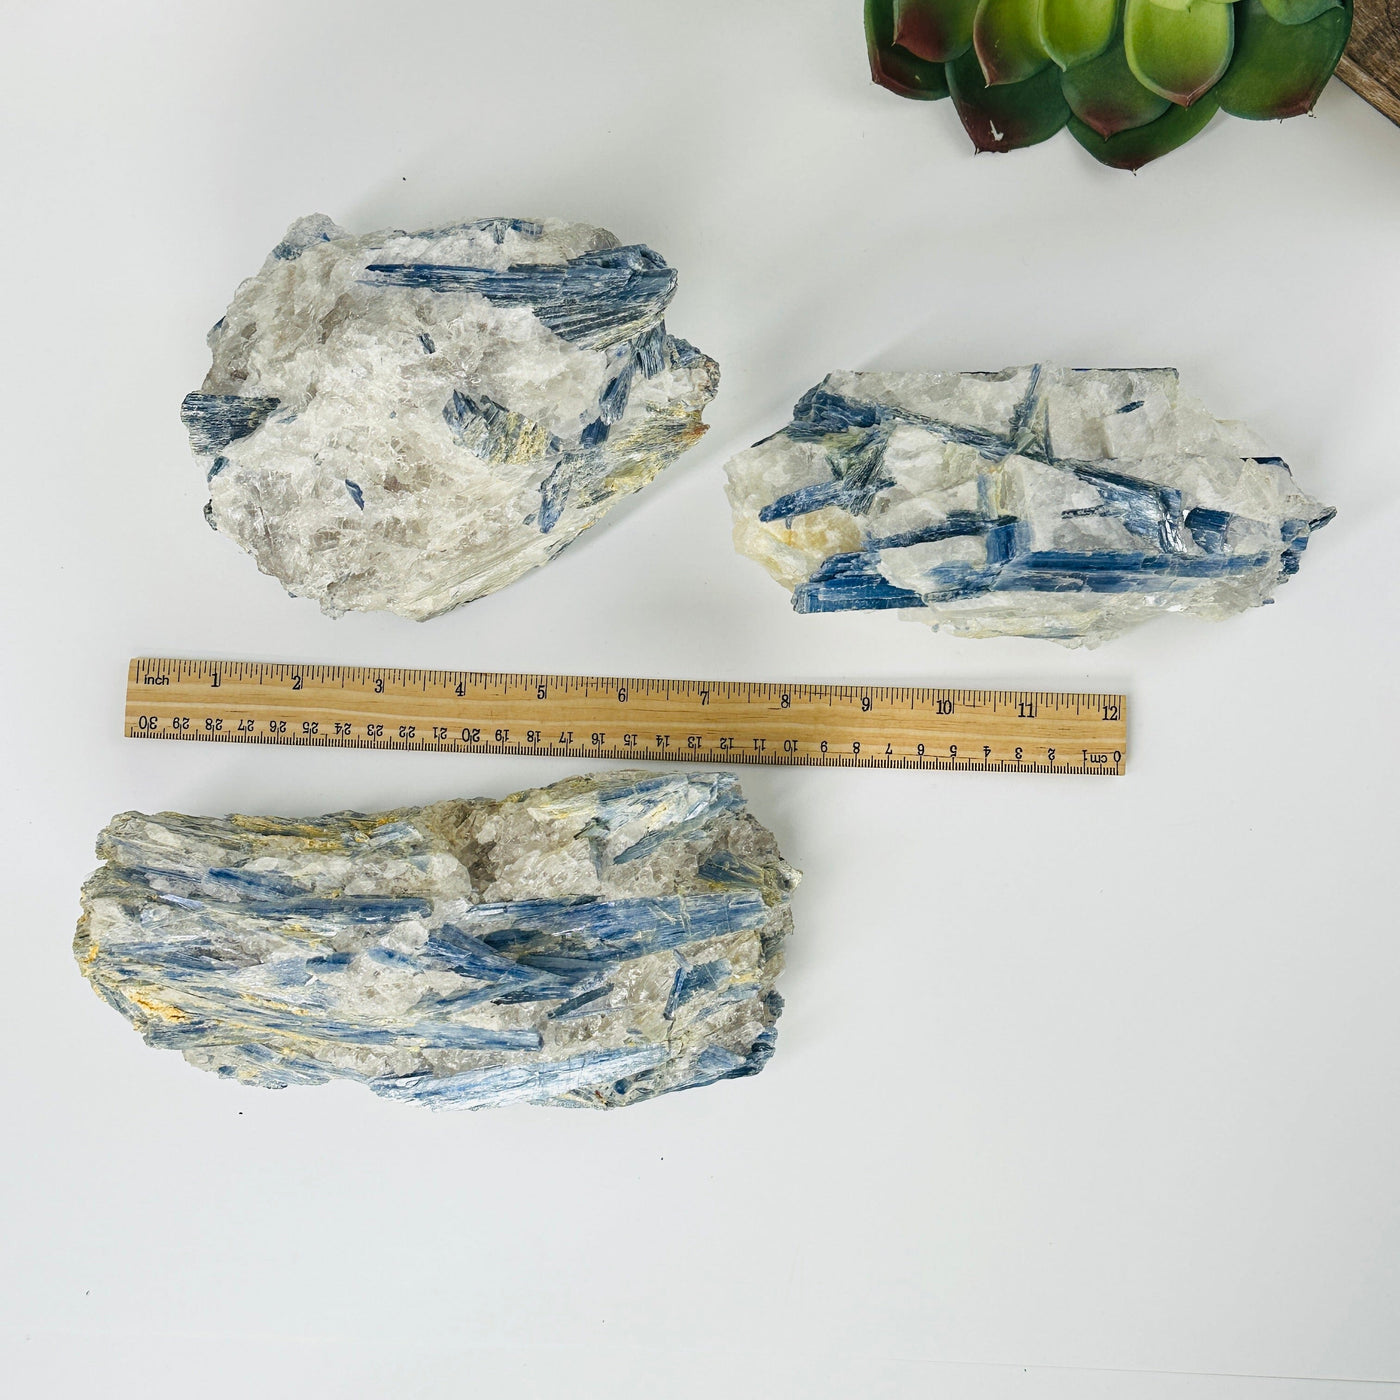 blue kyanite on matrix next to a ruler for size reference